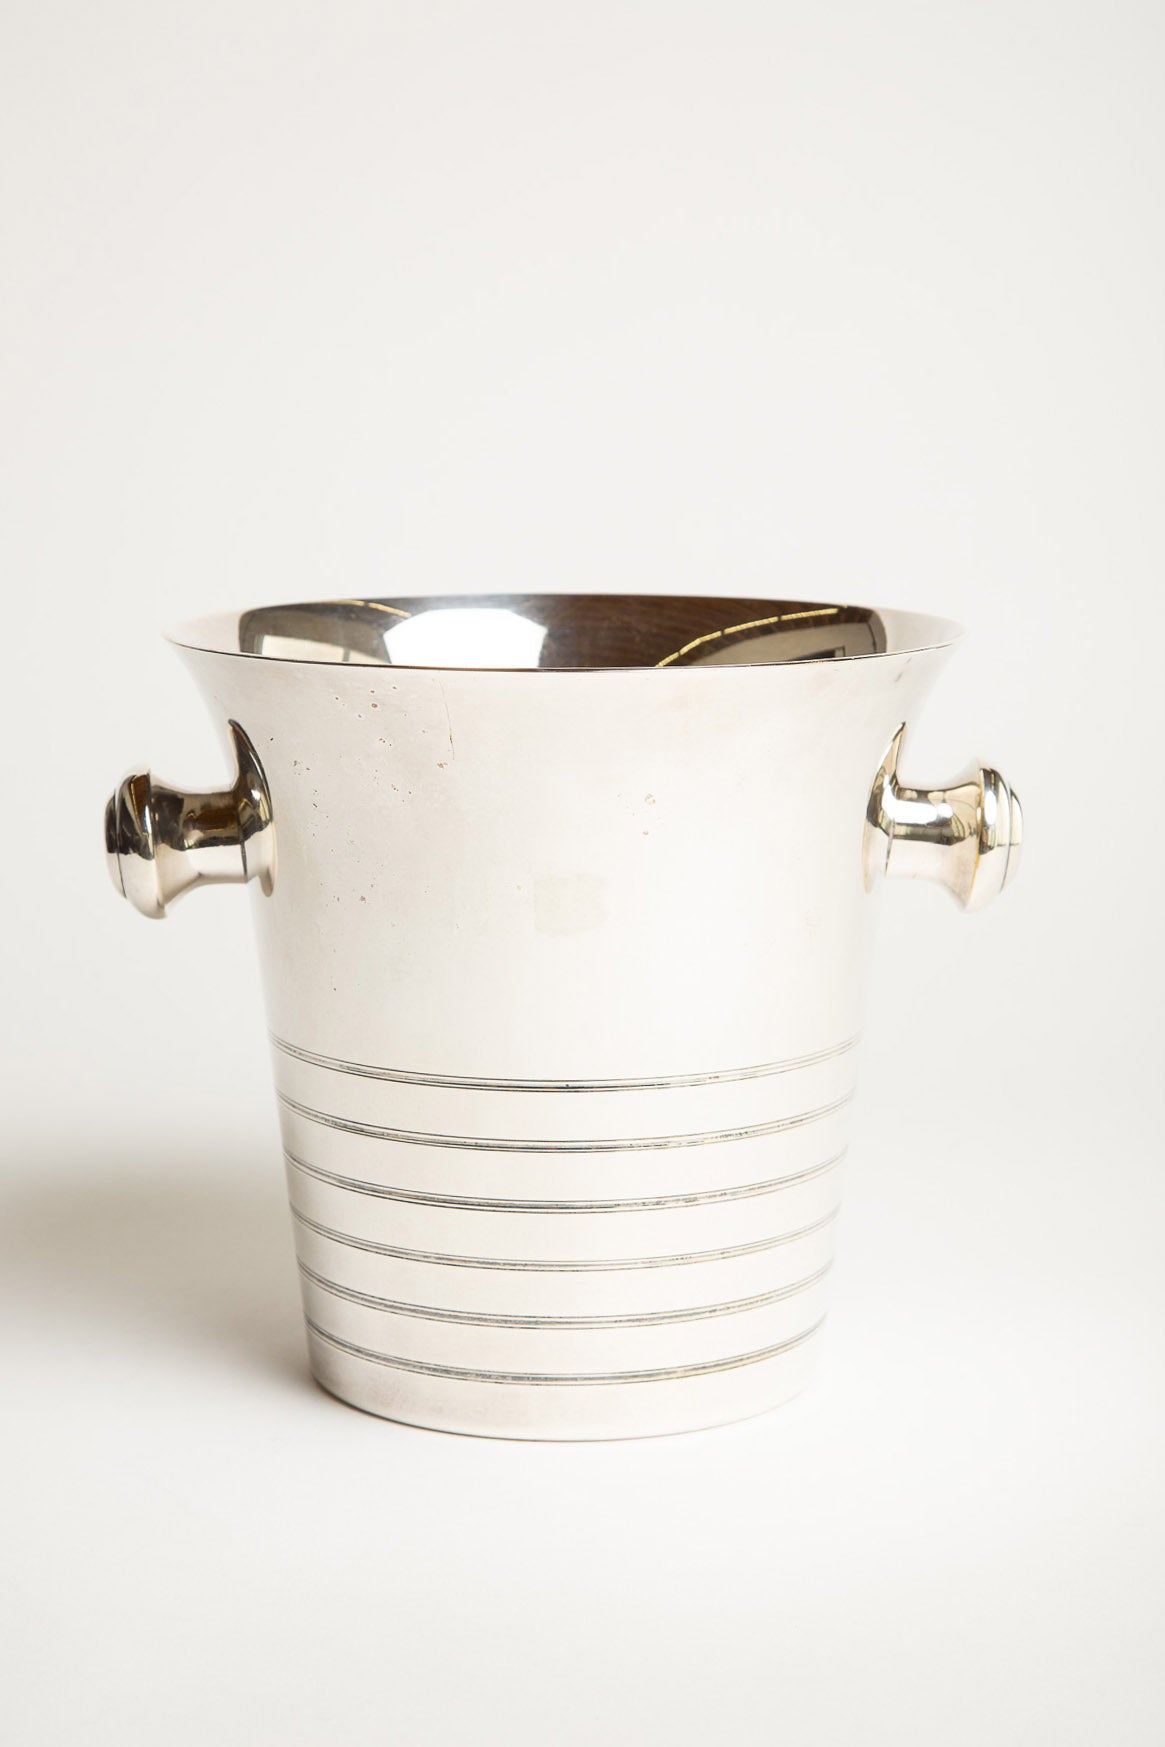 MAXFIELD PRIVATE COLLECTION | ICE BUCKET